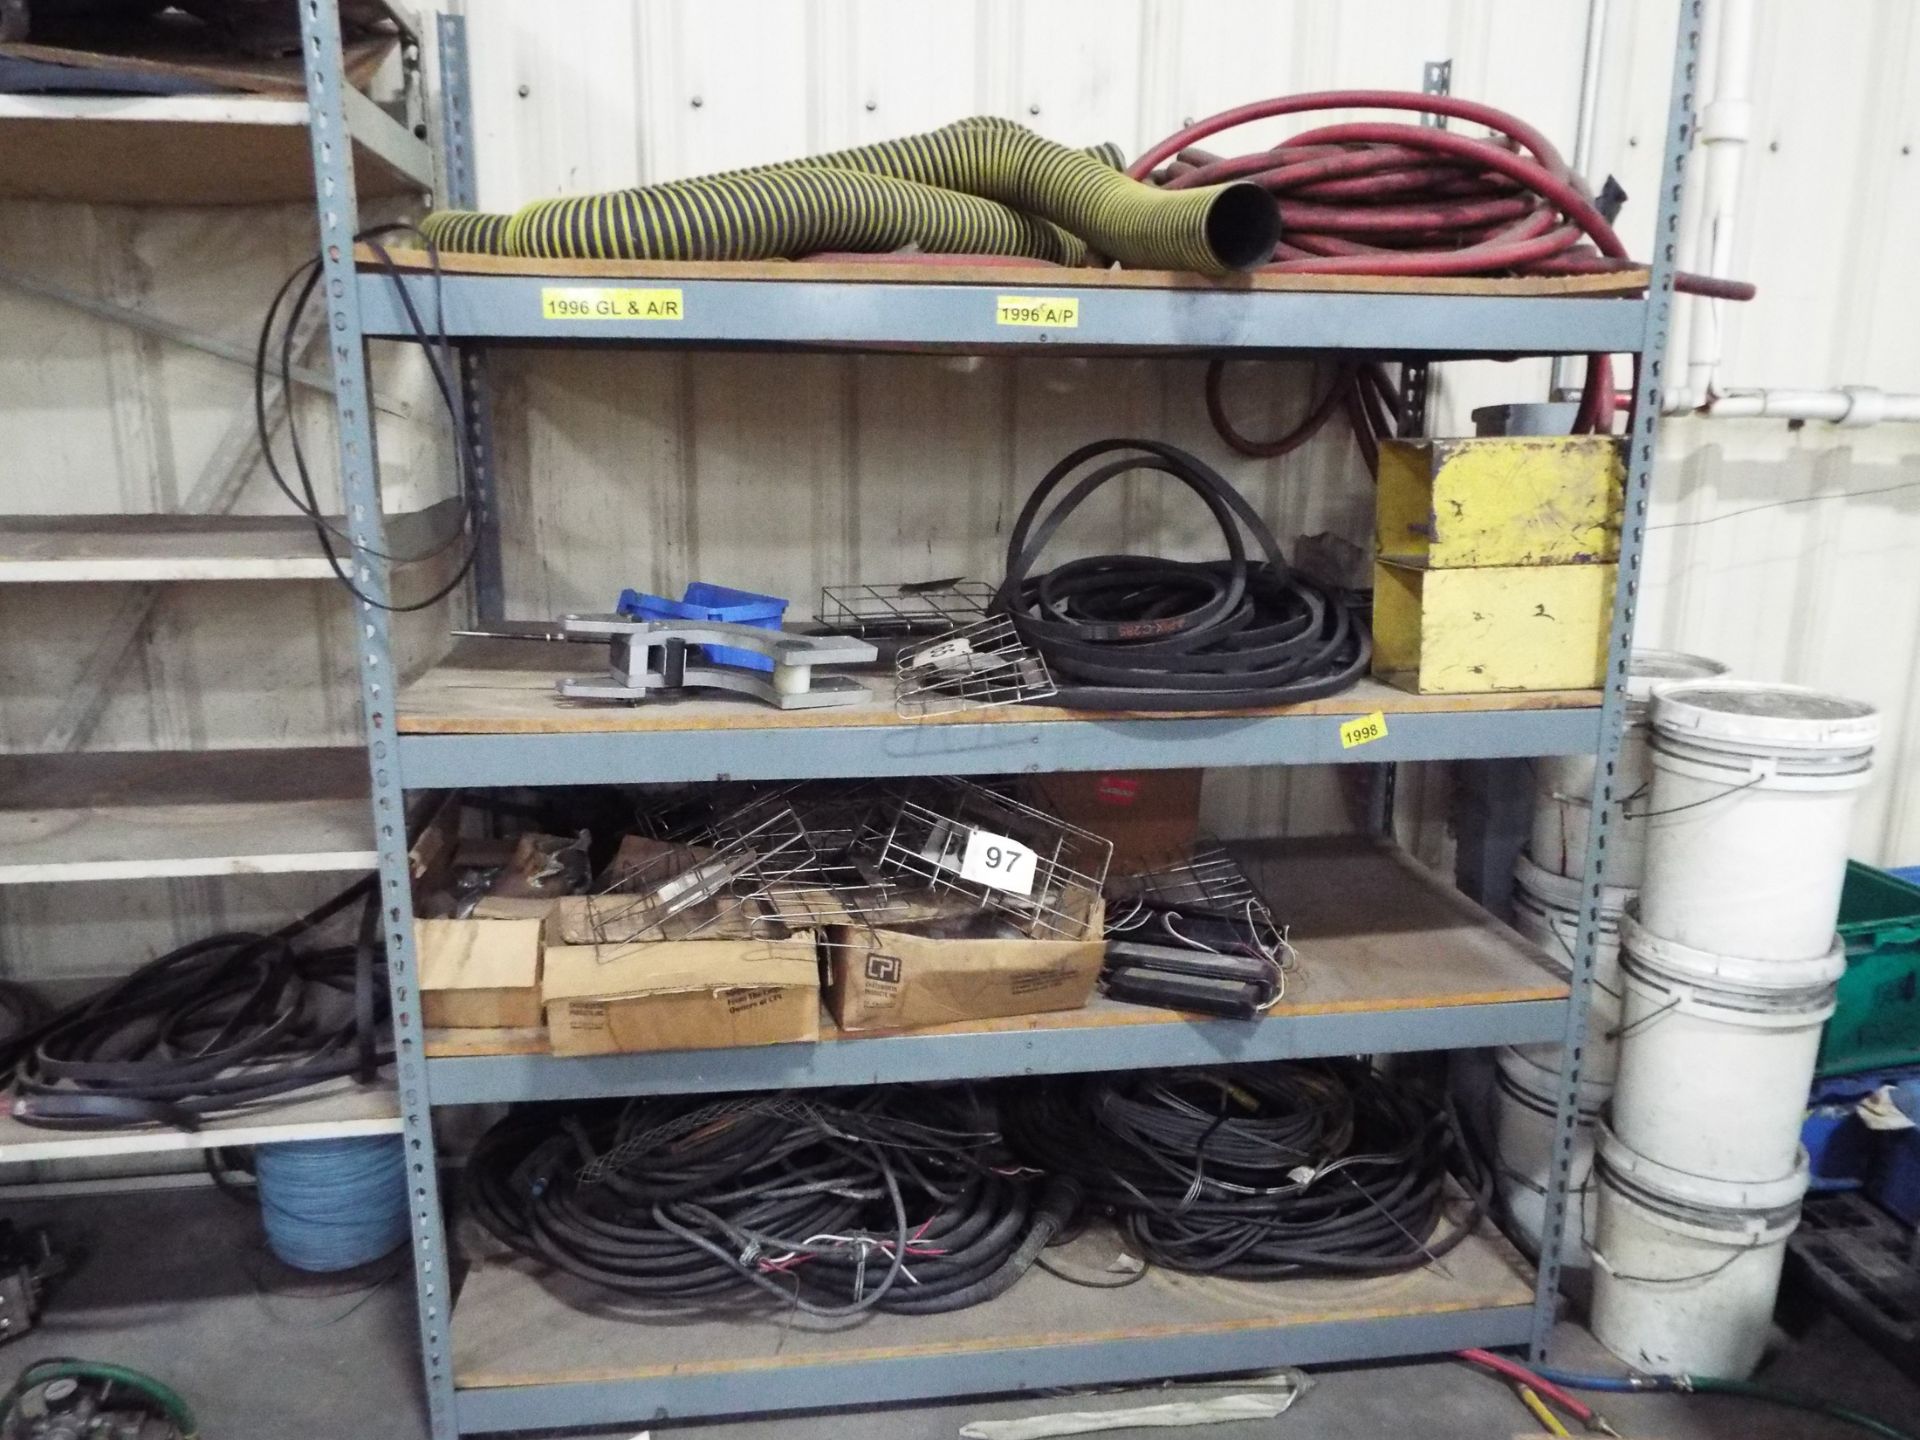 LOT/ SHELVES WITH CONTENTS - BELTS, HIGH VOLTAGE CABLES, PNEUMATIC HOSE, FILTERS, SPARE PARTS - Image 4 of 4